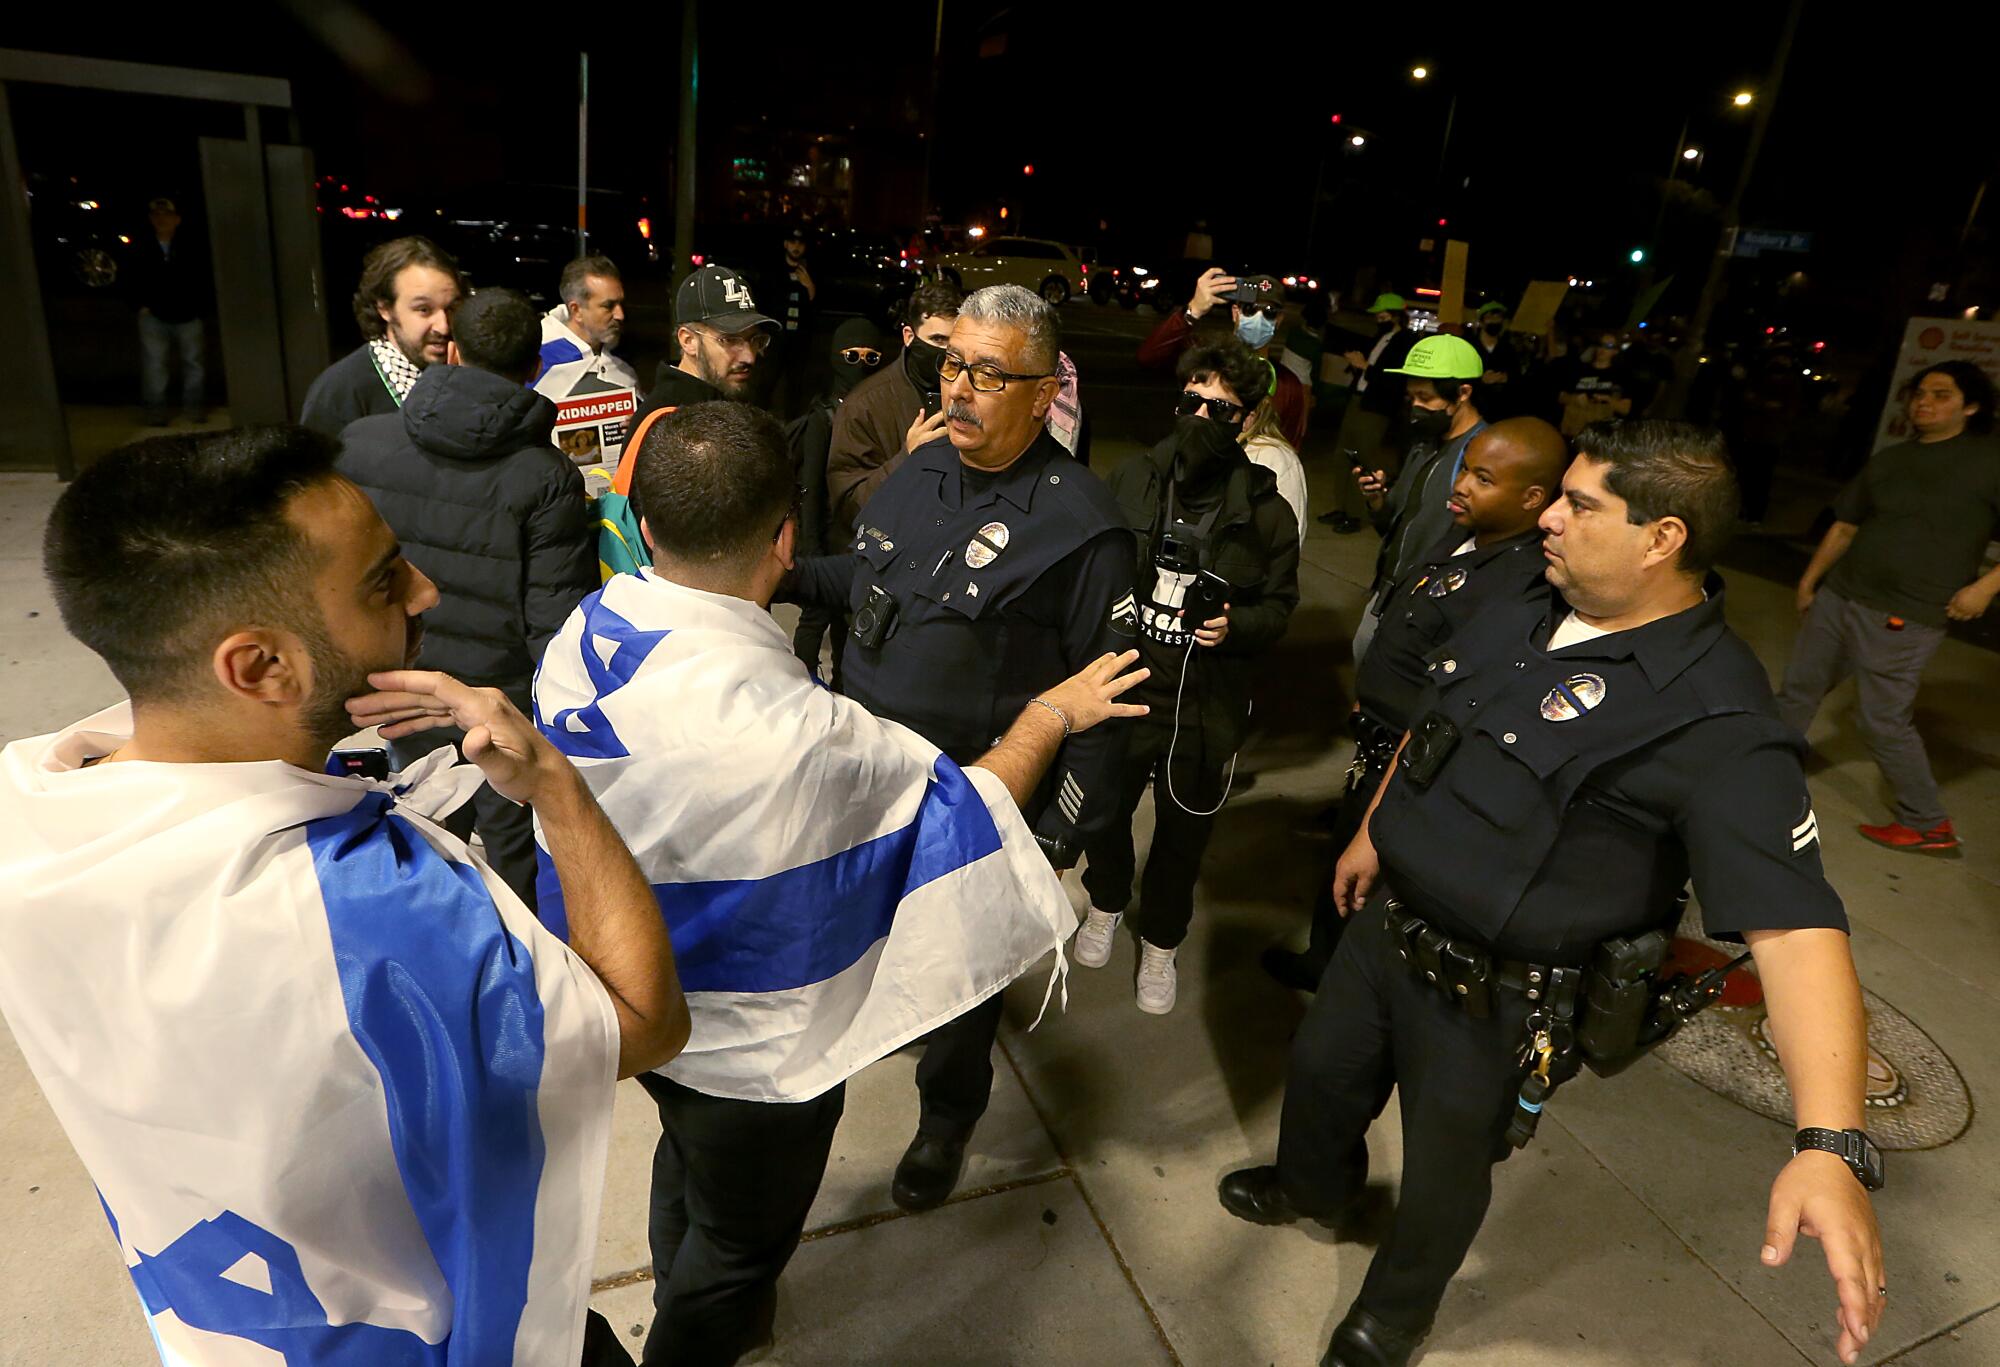 Men draped in Israeli flags stand in front of police officers.